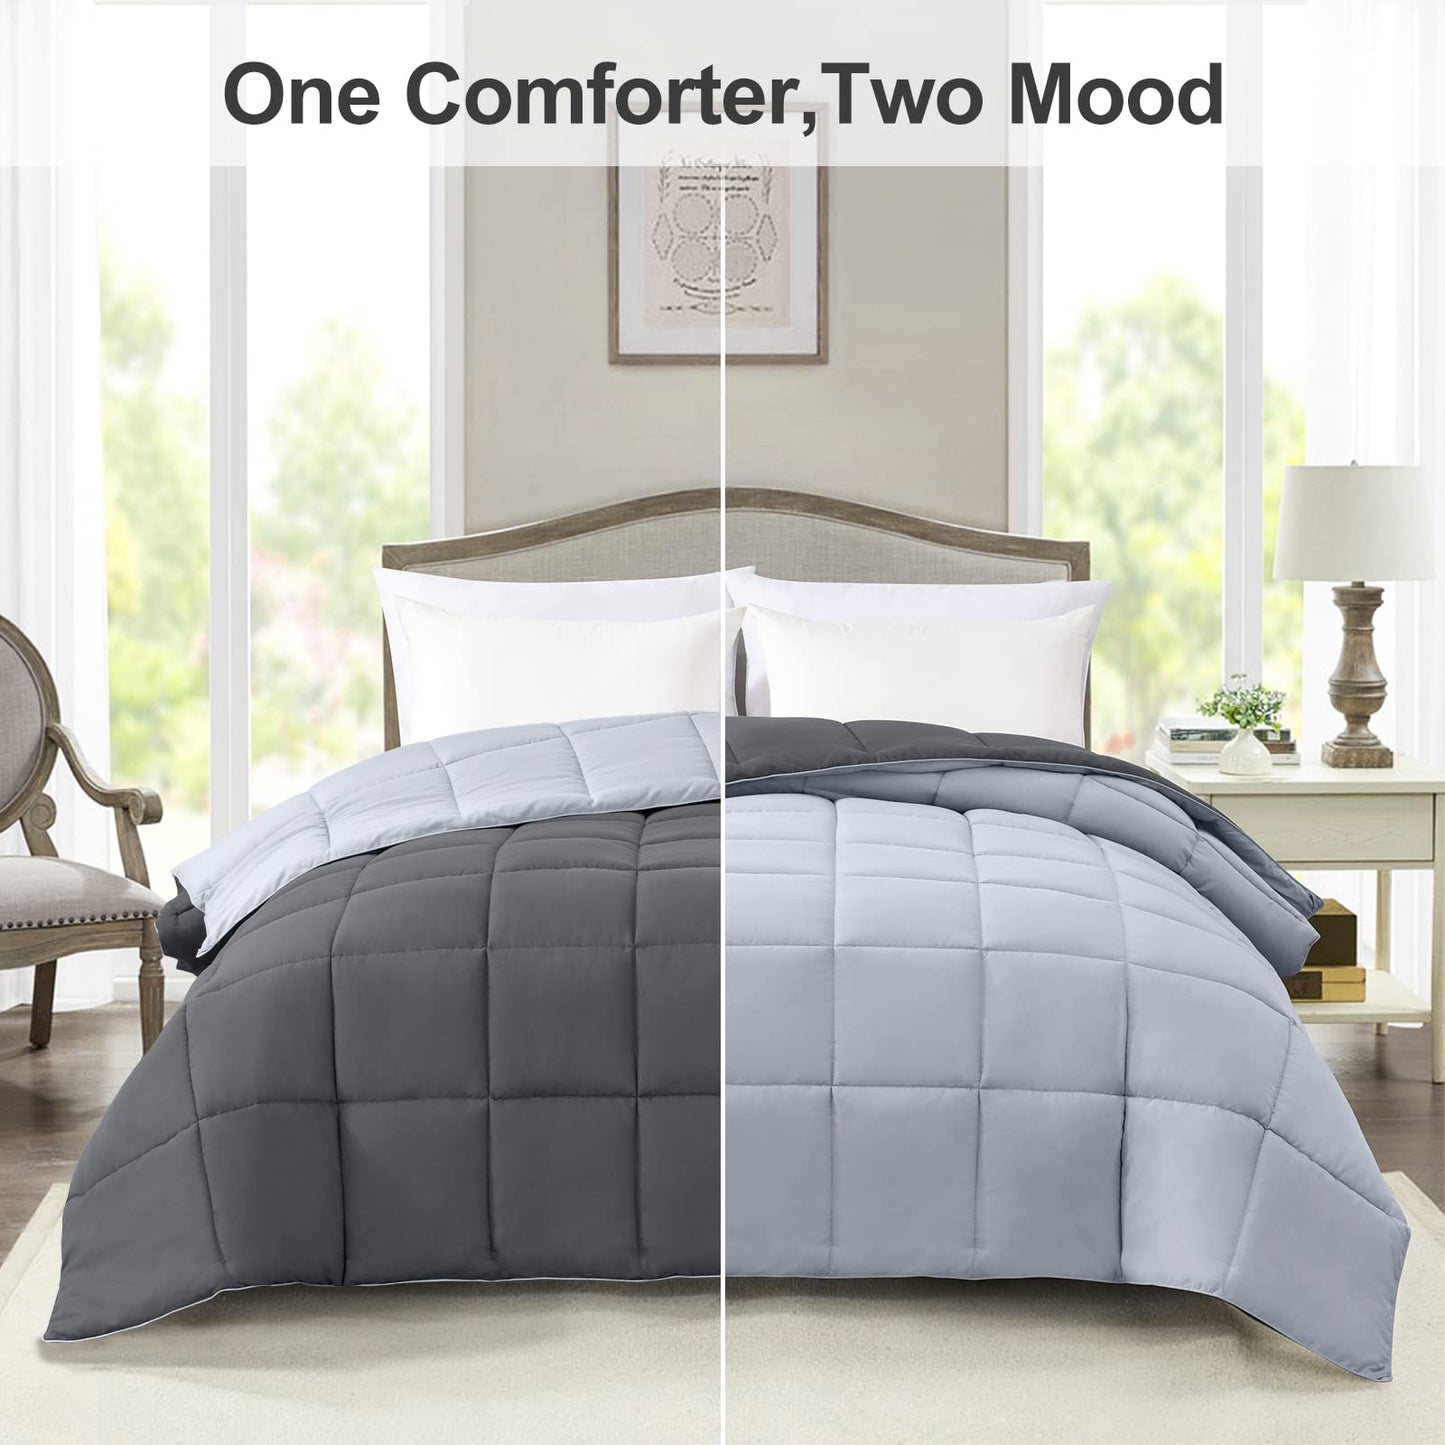 Homelike Moment Lightweight Twin Comforter - Grey Down Alternative Comforters Twin Size Bed, All Season Duvet Insert Quilted Reversible Bedding Comforter Soft Cozy Twin Size Dark Gray/Light Grey